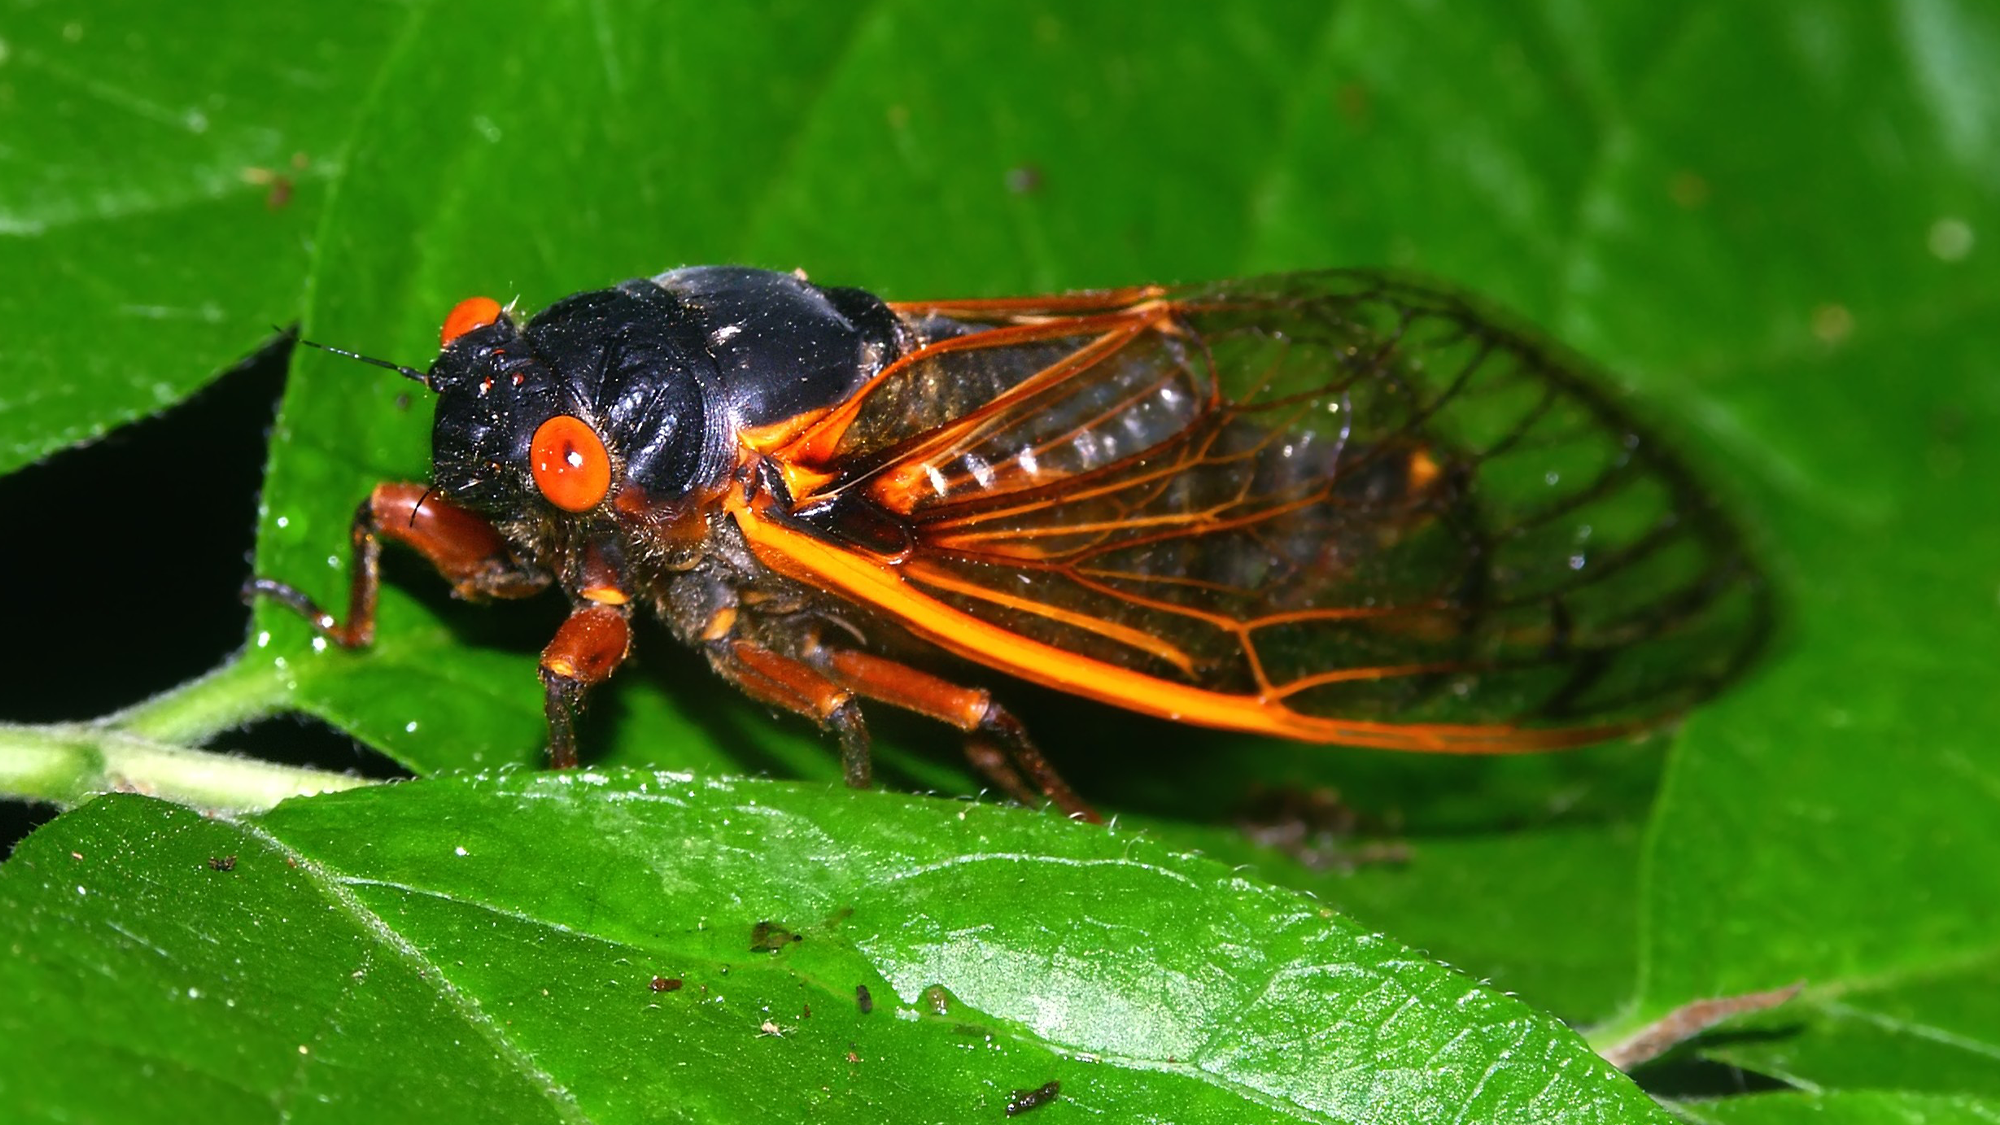 A cicada sitting on a green leaf. The insect has bright orange eyes and large wings. Cicadas live underground for 13 or 17 years, before emerging to mate.